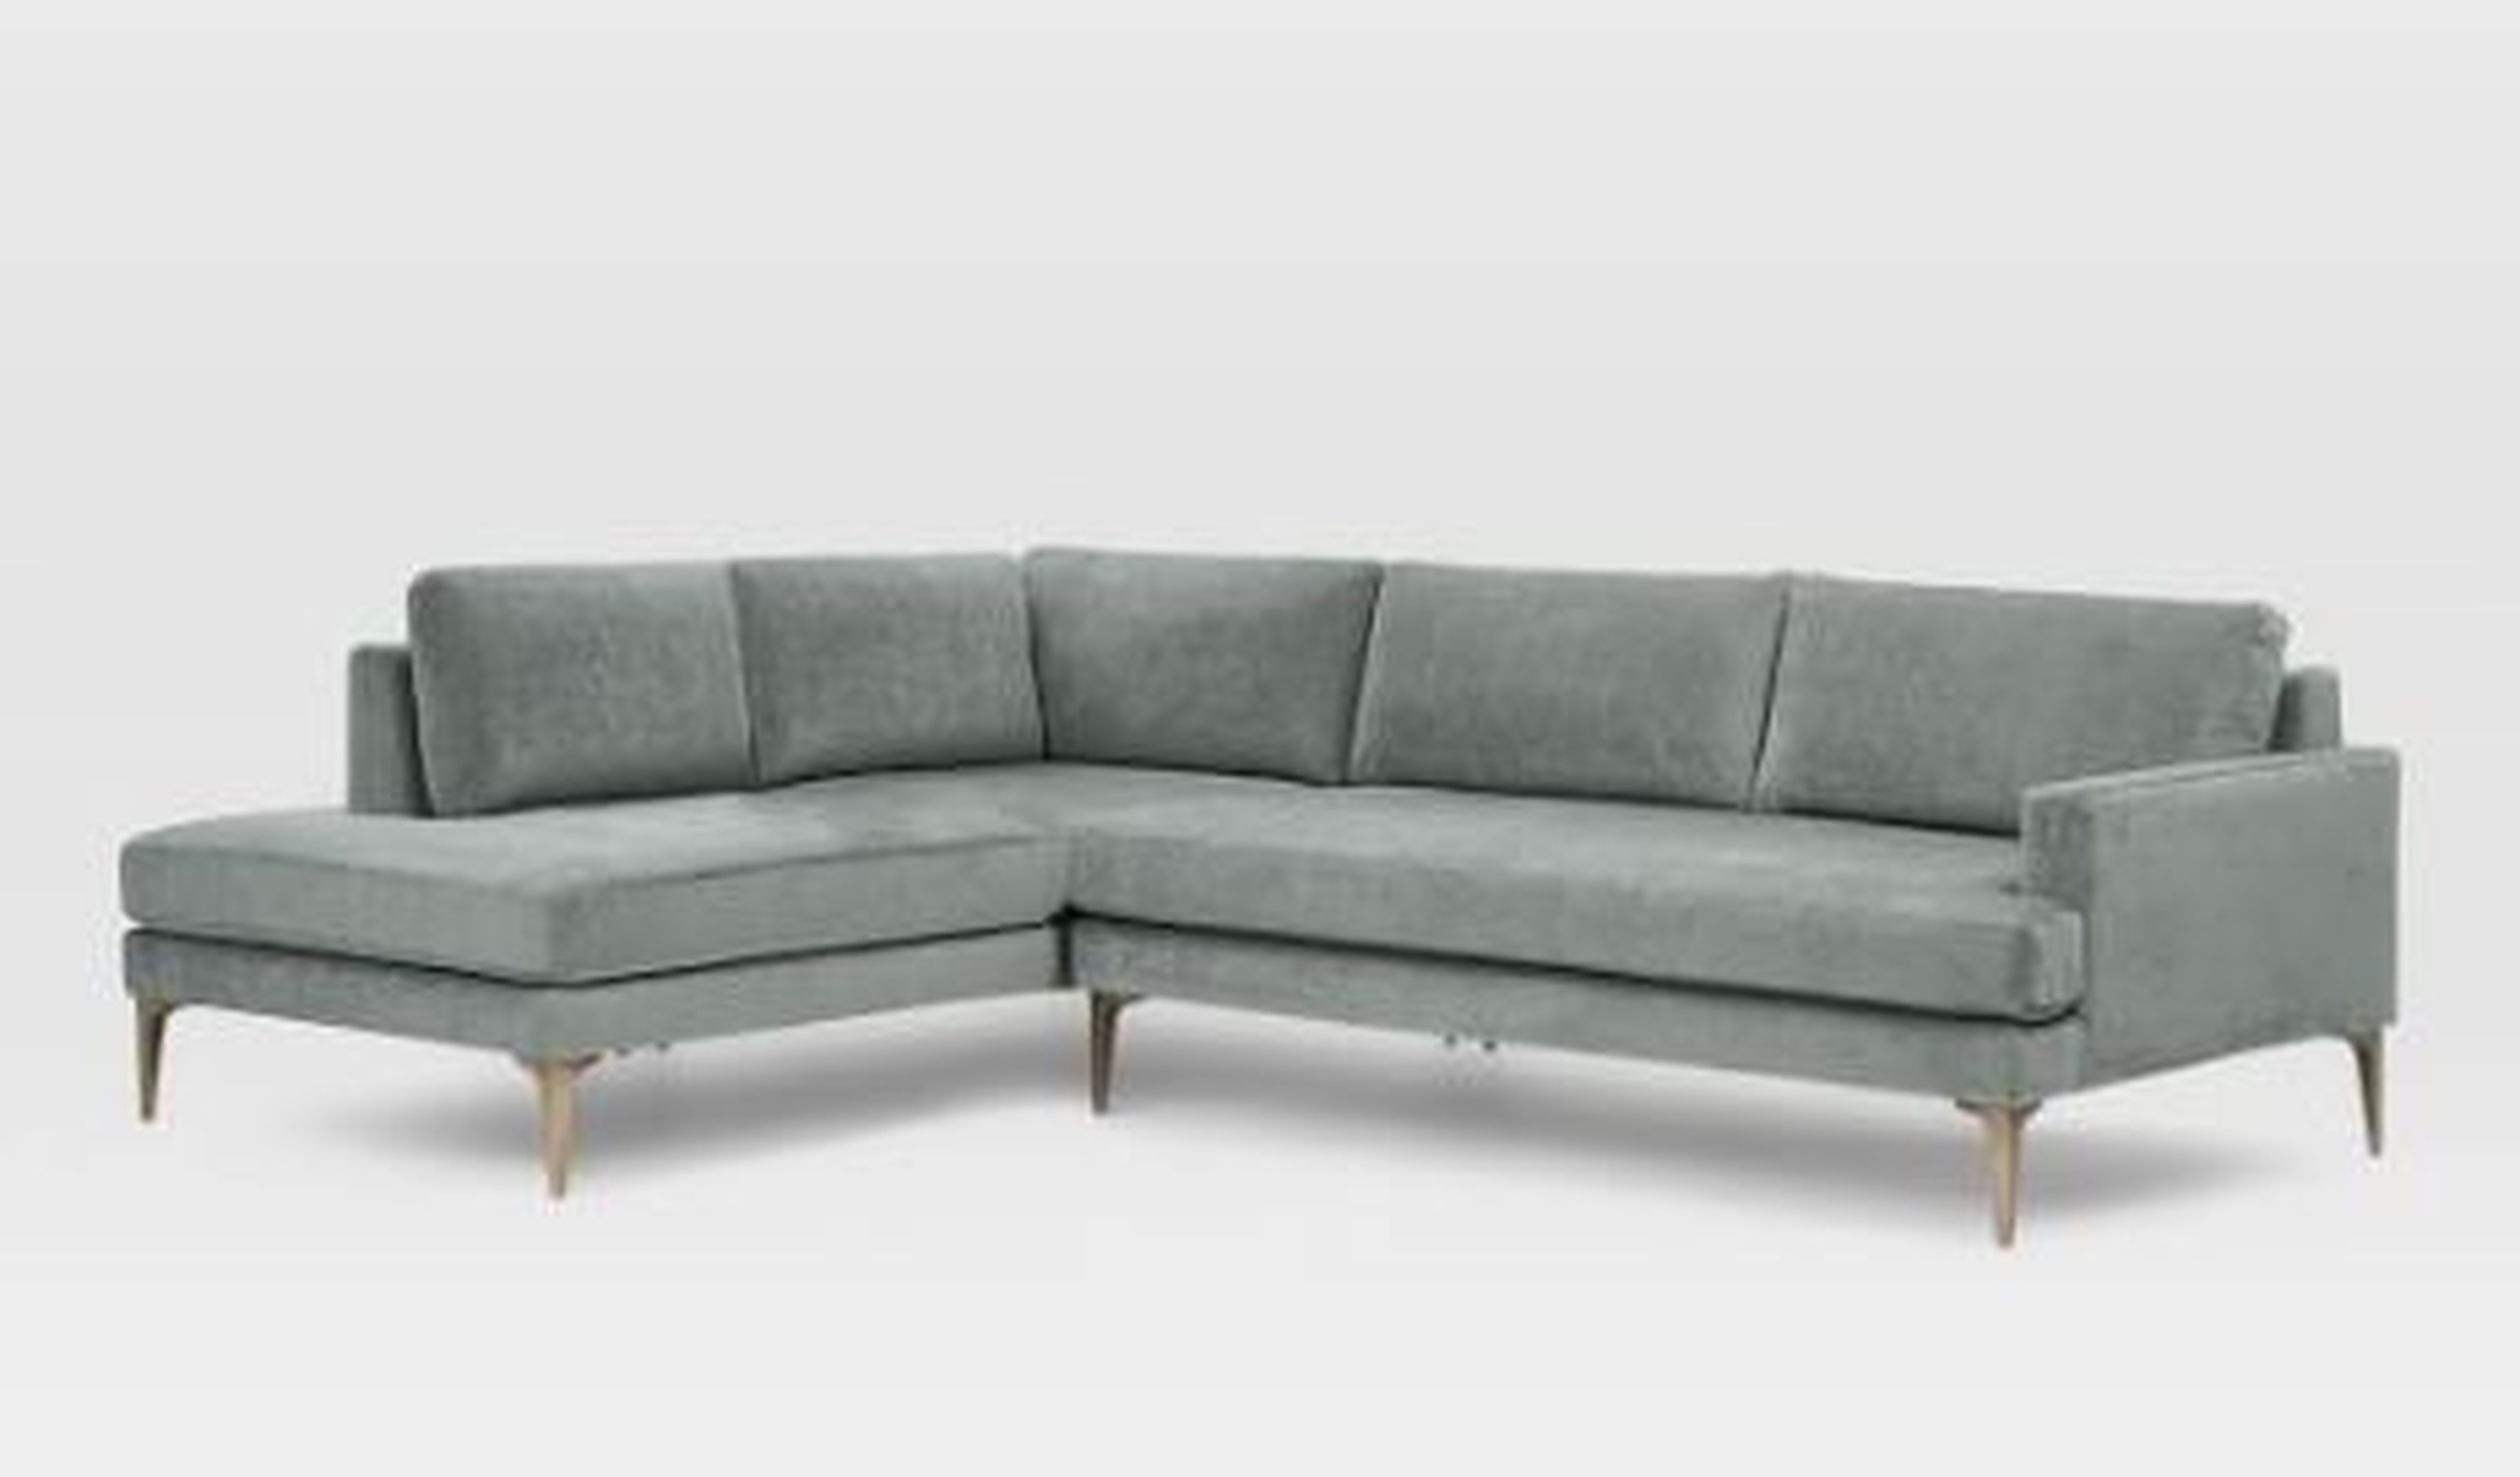 Andes Sectional Set 14: Right Arm 2.5 Seater Sofa, Left Arm Terminal Chaise, Poly, Distressed Velvet, Mineral Gray, Blackened Brass - West Elm